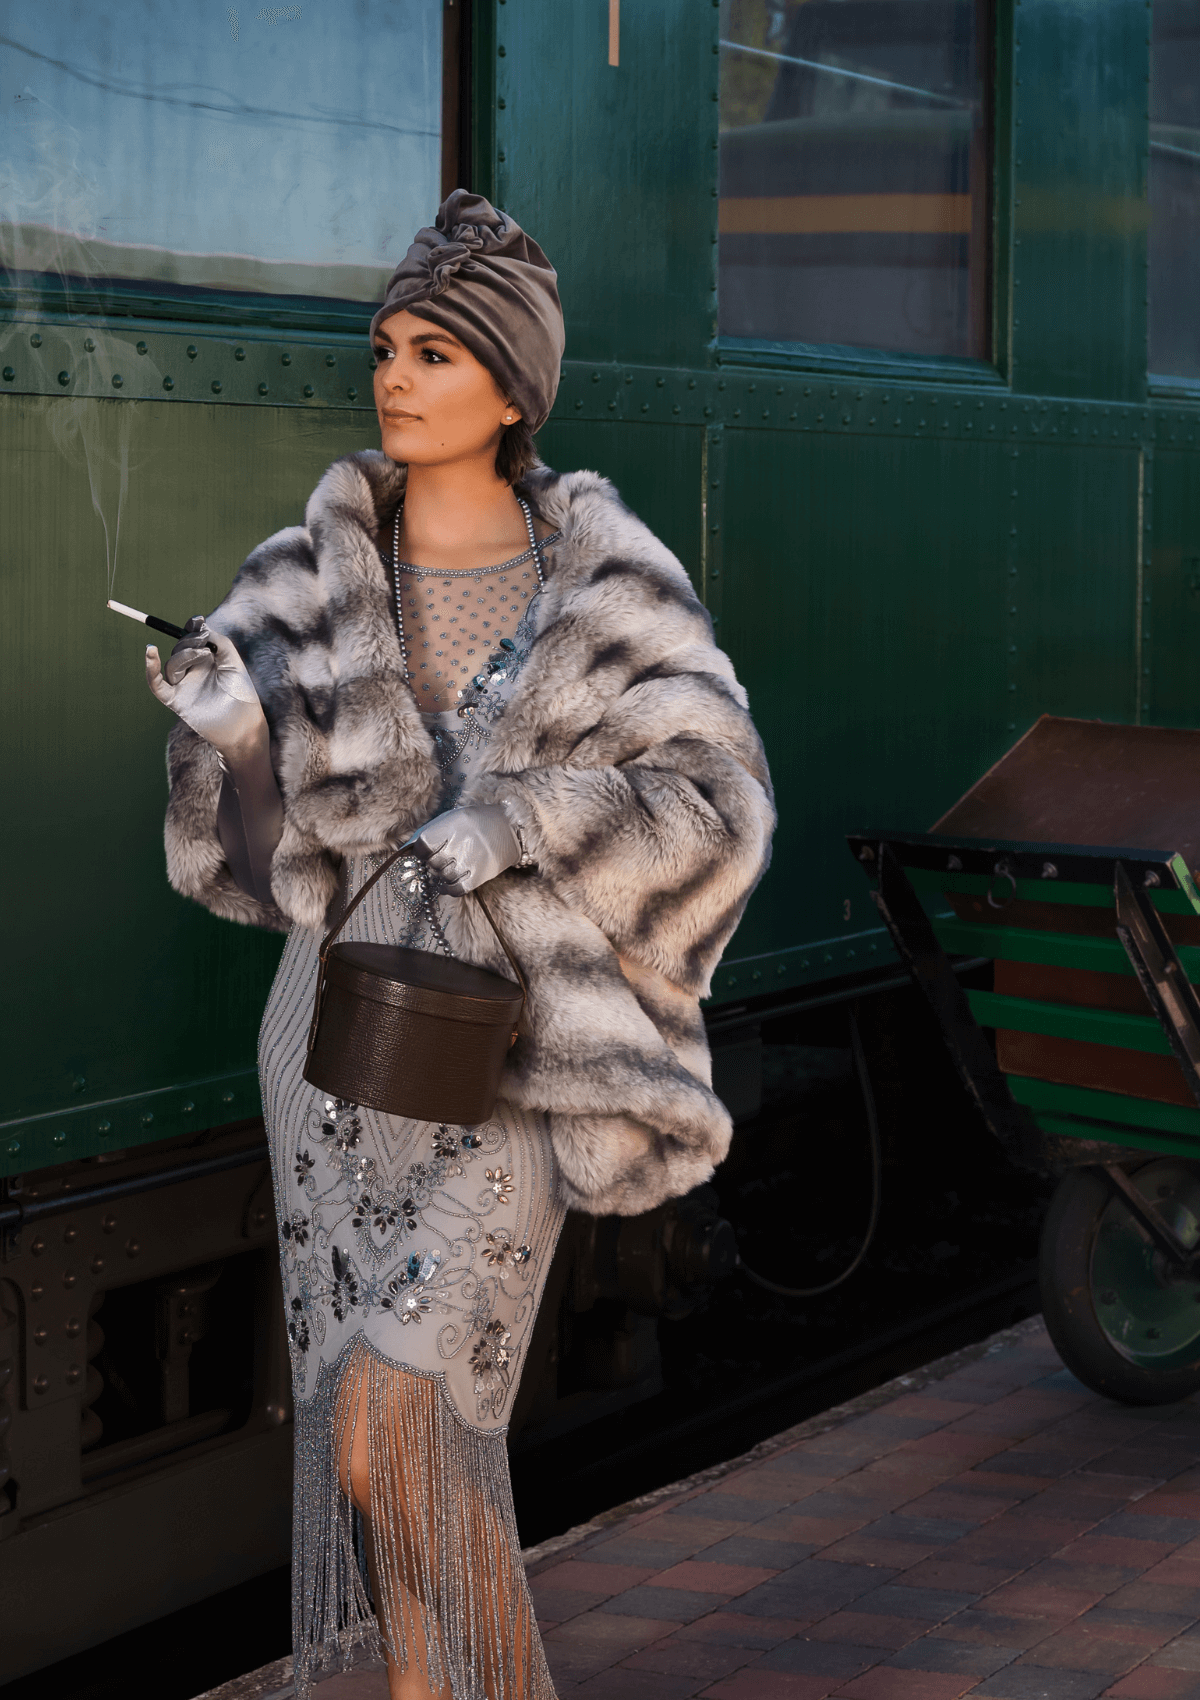 1920s fashion at Winter Deco Napier is one of the festivals in New Zealand